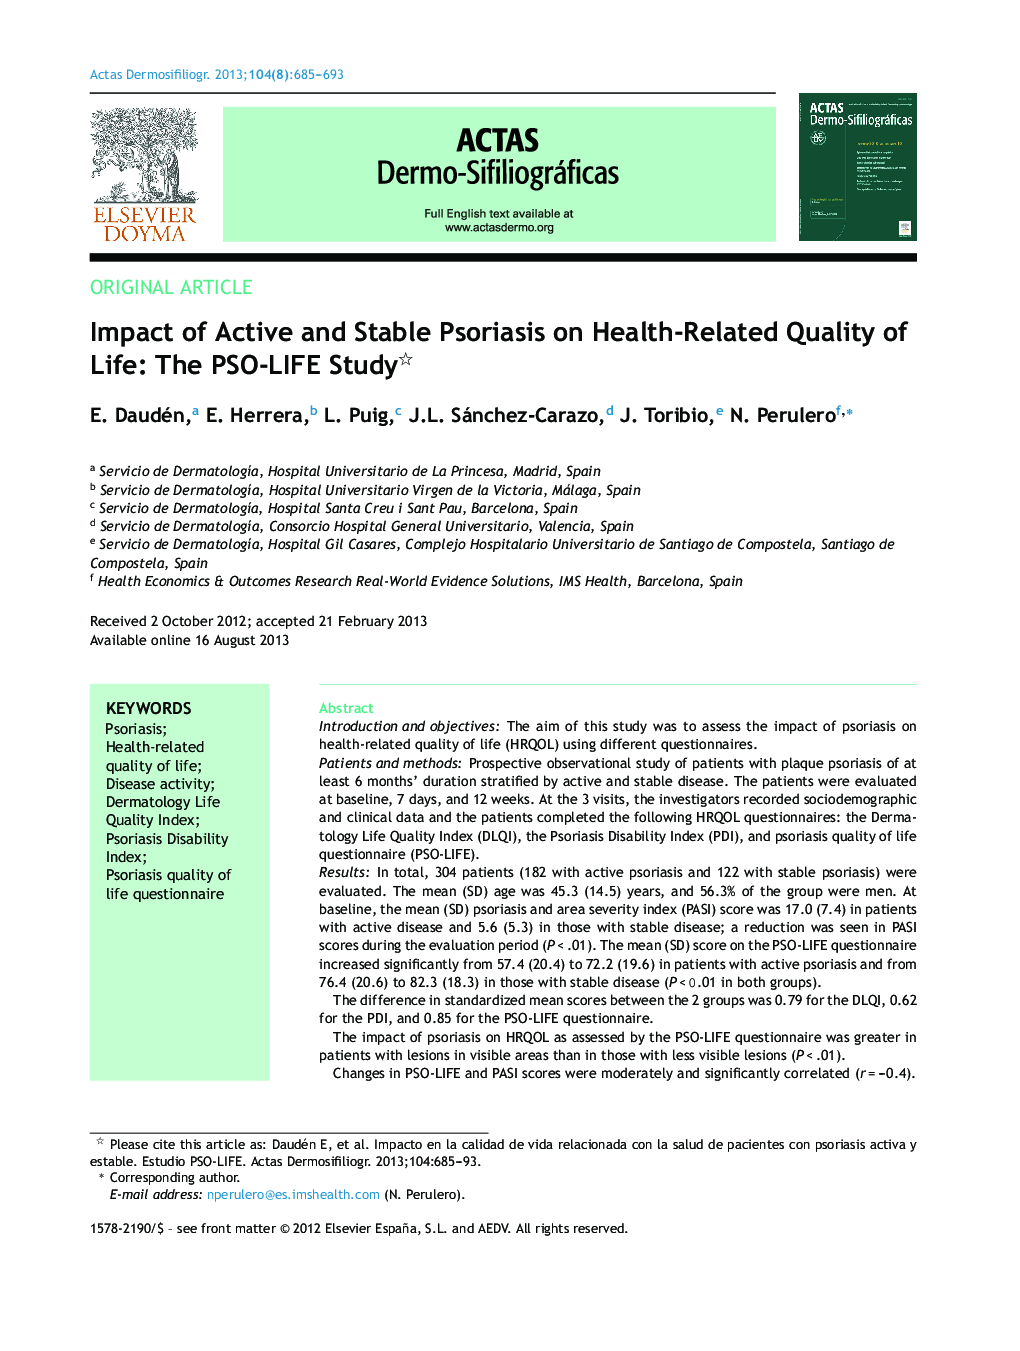 Impact of Active and Stable Psoriasis on Health-Related Quality of Life: The PSO-LIFE Study 